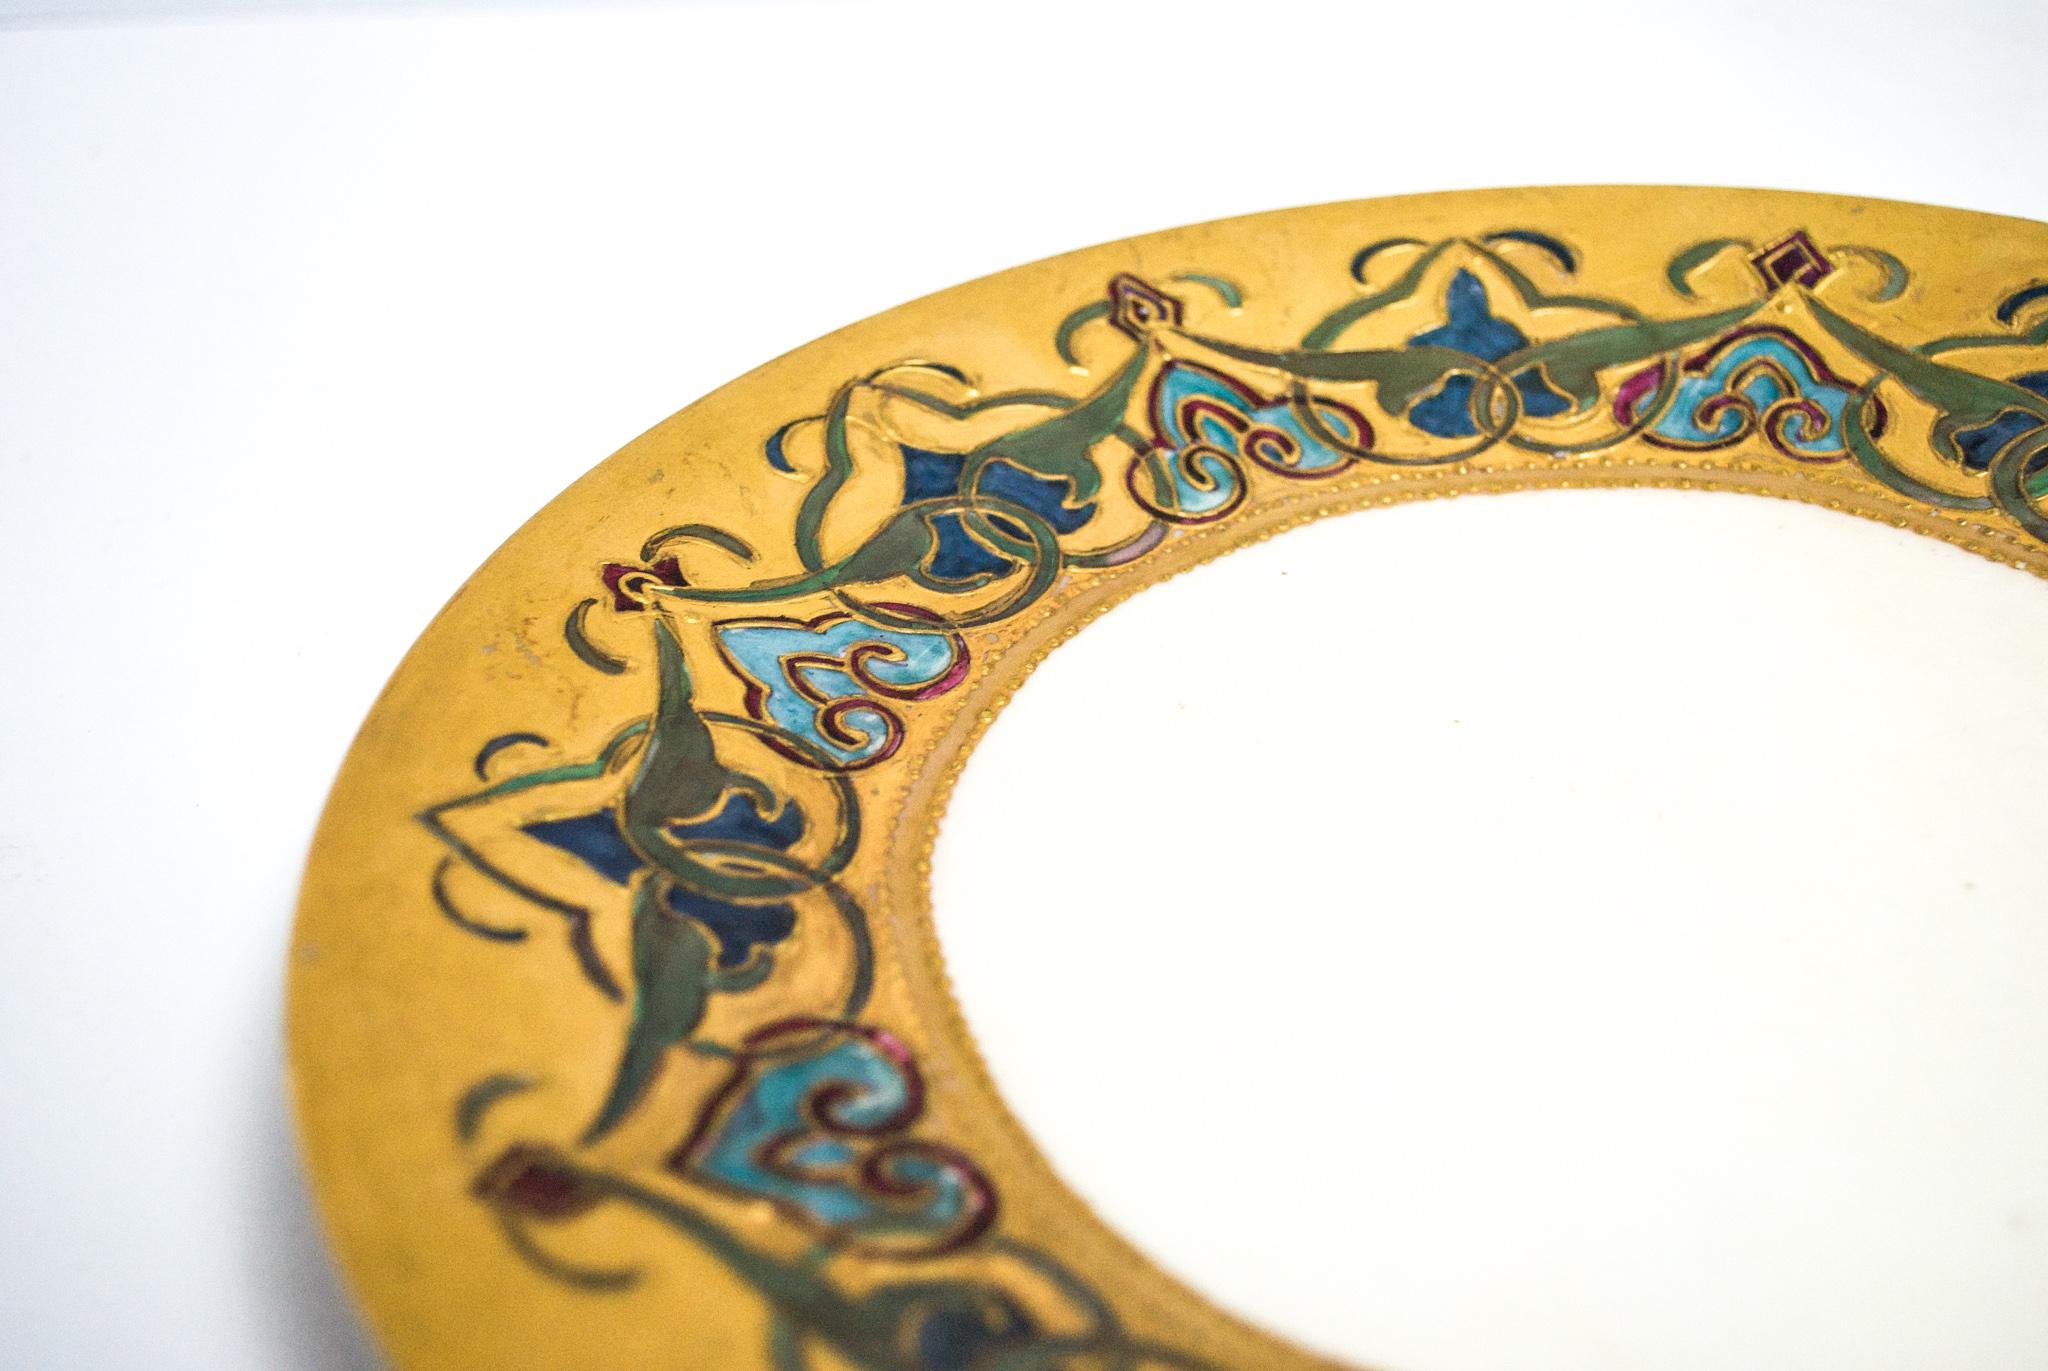 This stunning hand painted gilded plate is sure to impress. The J.P.L. mark on the back dates the piece to 1906-1932.

The Pouyat family was one of the oldest French names connected with the Limoges porcelain industry. Jean Pouyat's grandfather